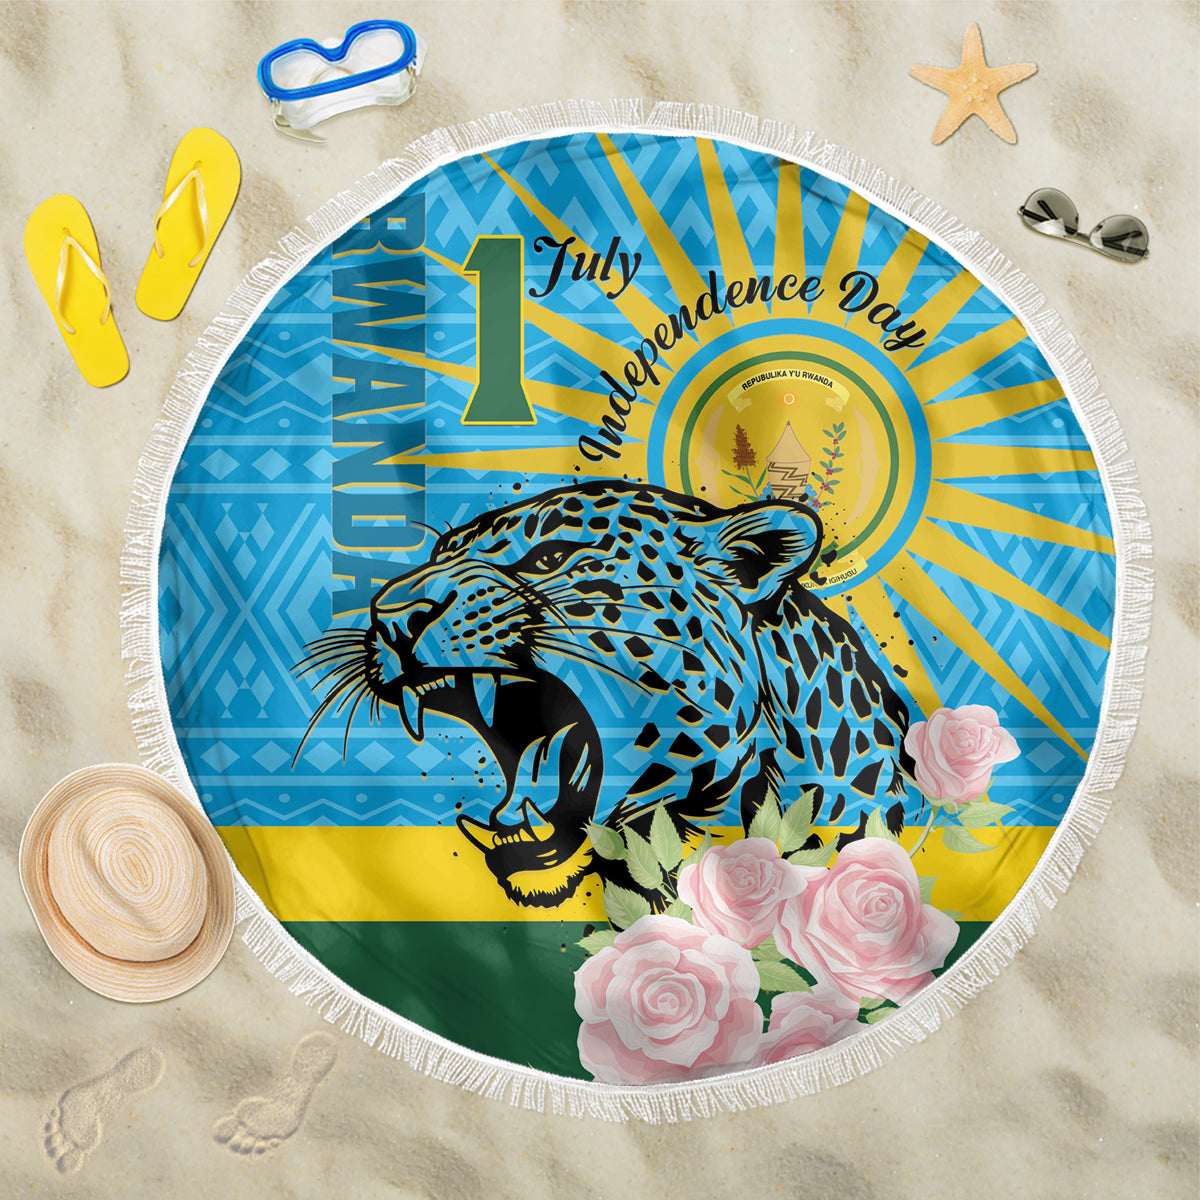 Rwanda Independence Day Beach Blanket Leopard With Roses